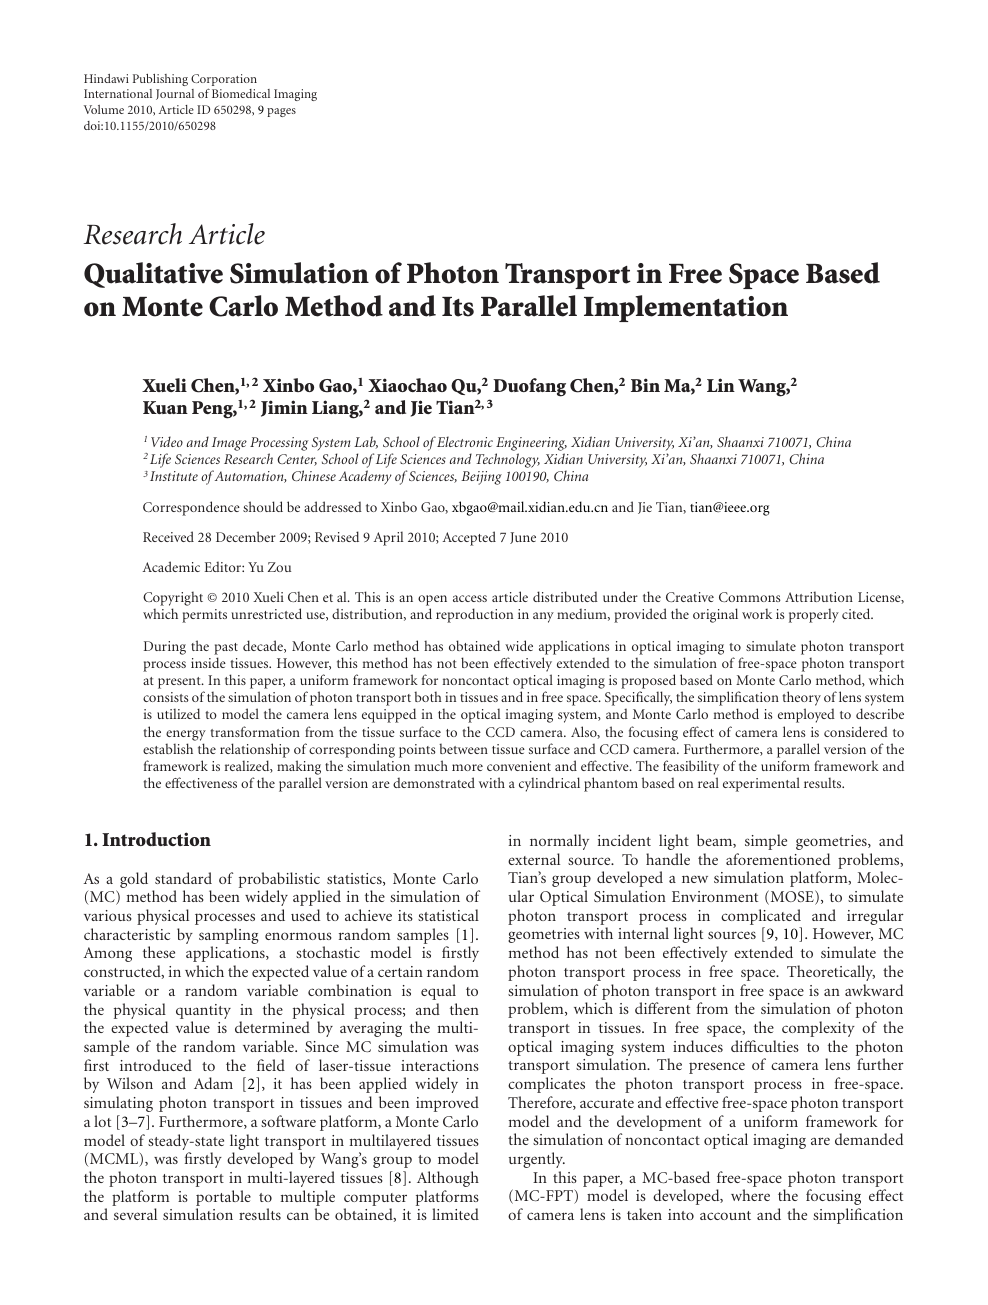 Qualitative Simulation Of Photon Transport In Free Space - 